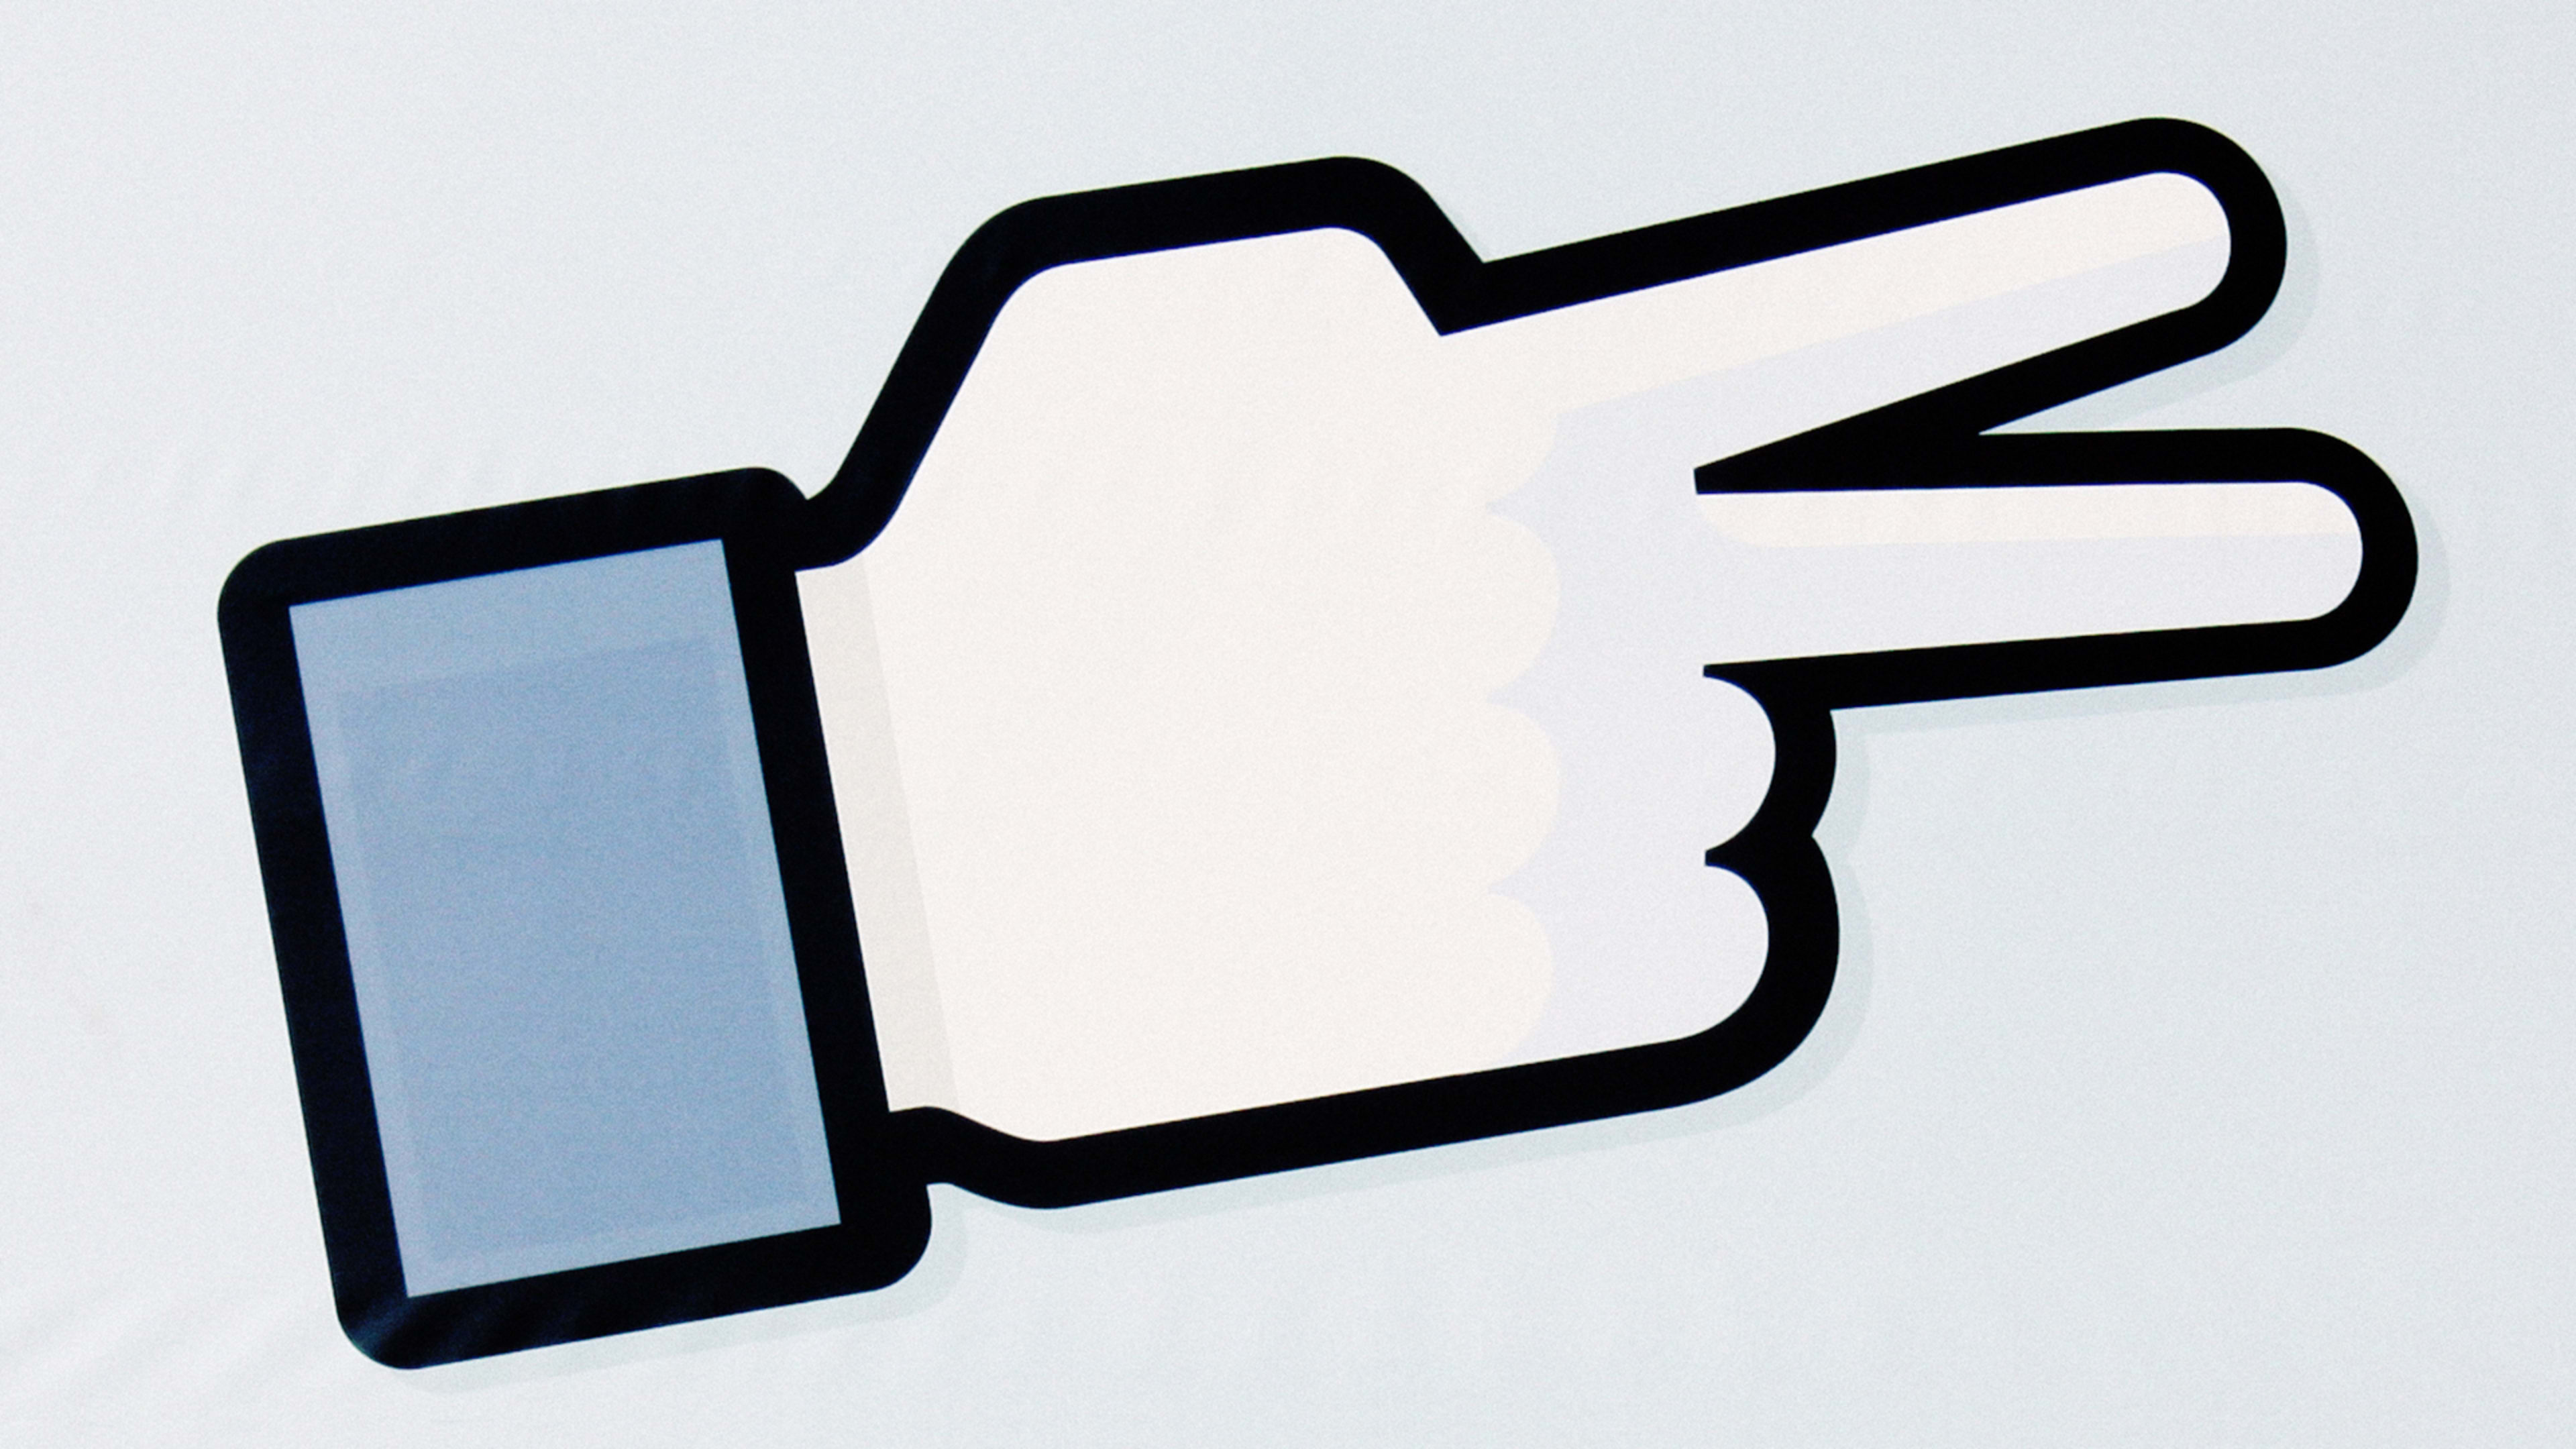 Facebook Has Serious Transparency Issues, But Advertisers Aren’t Going Anywhere